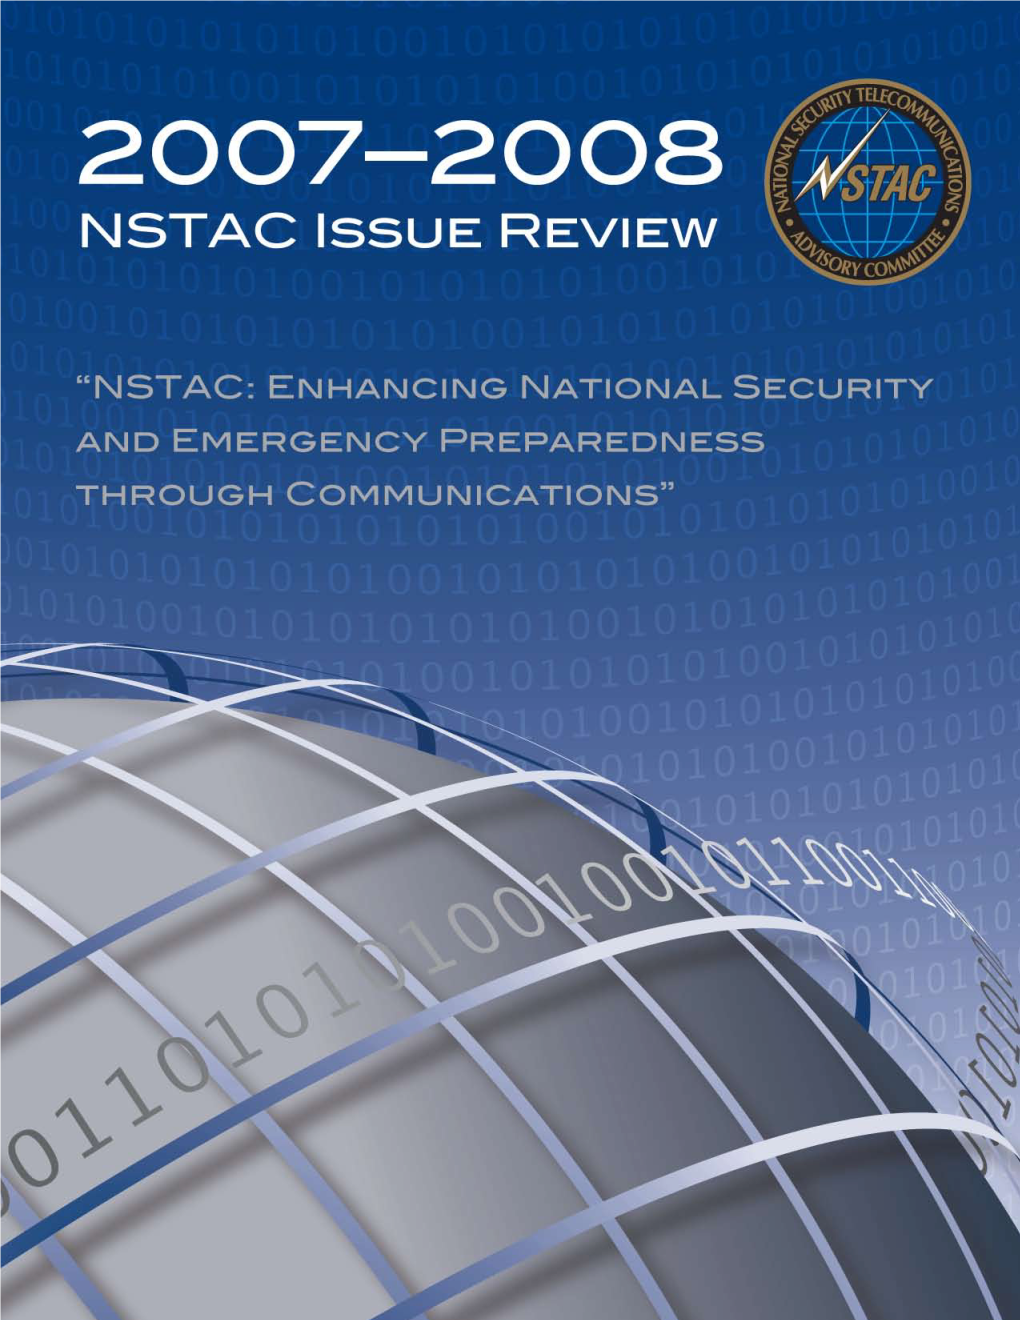 2007-2008 NSTAC Issue Review U Table of Contents